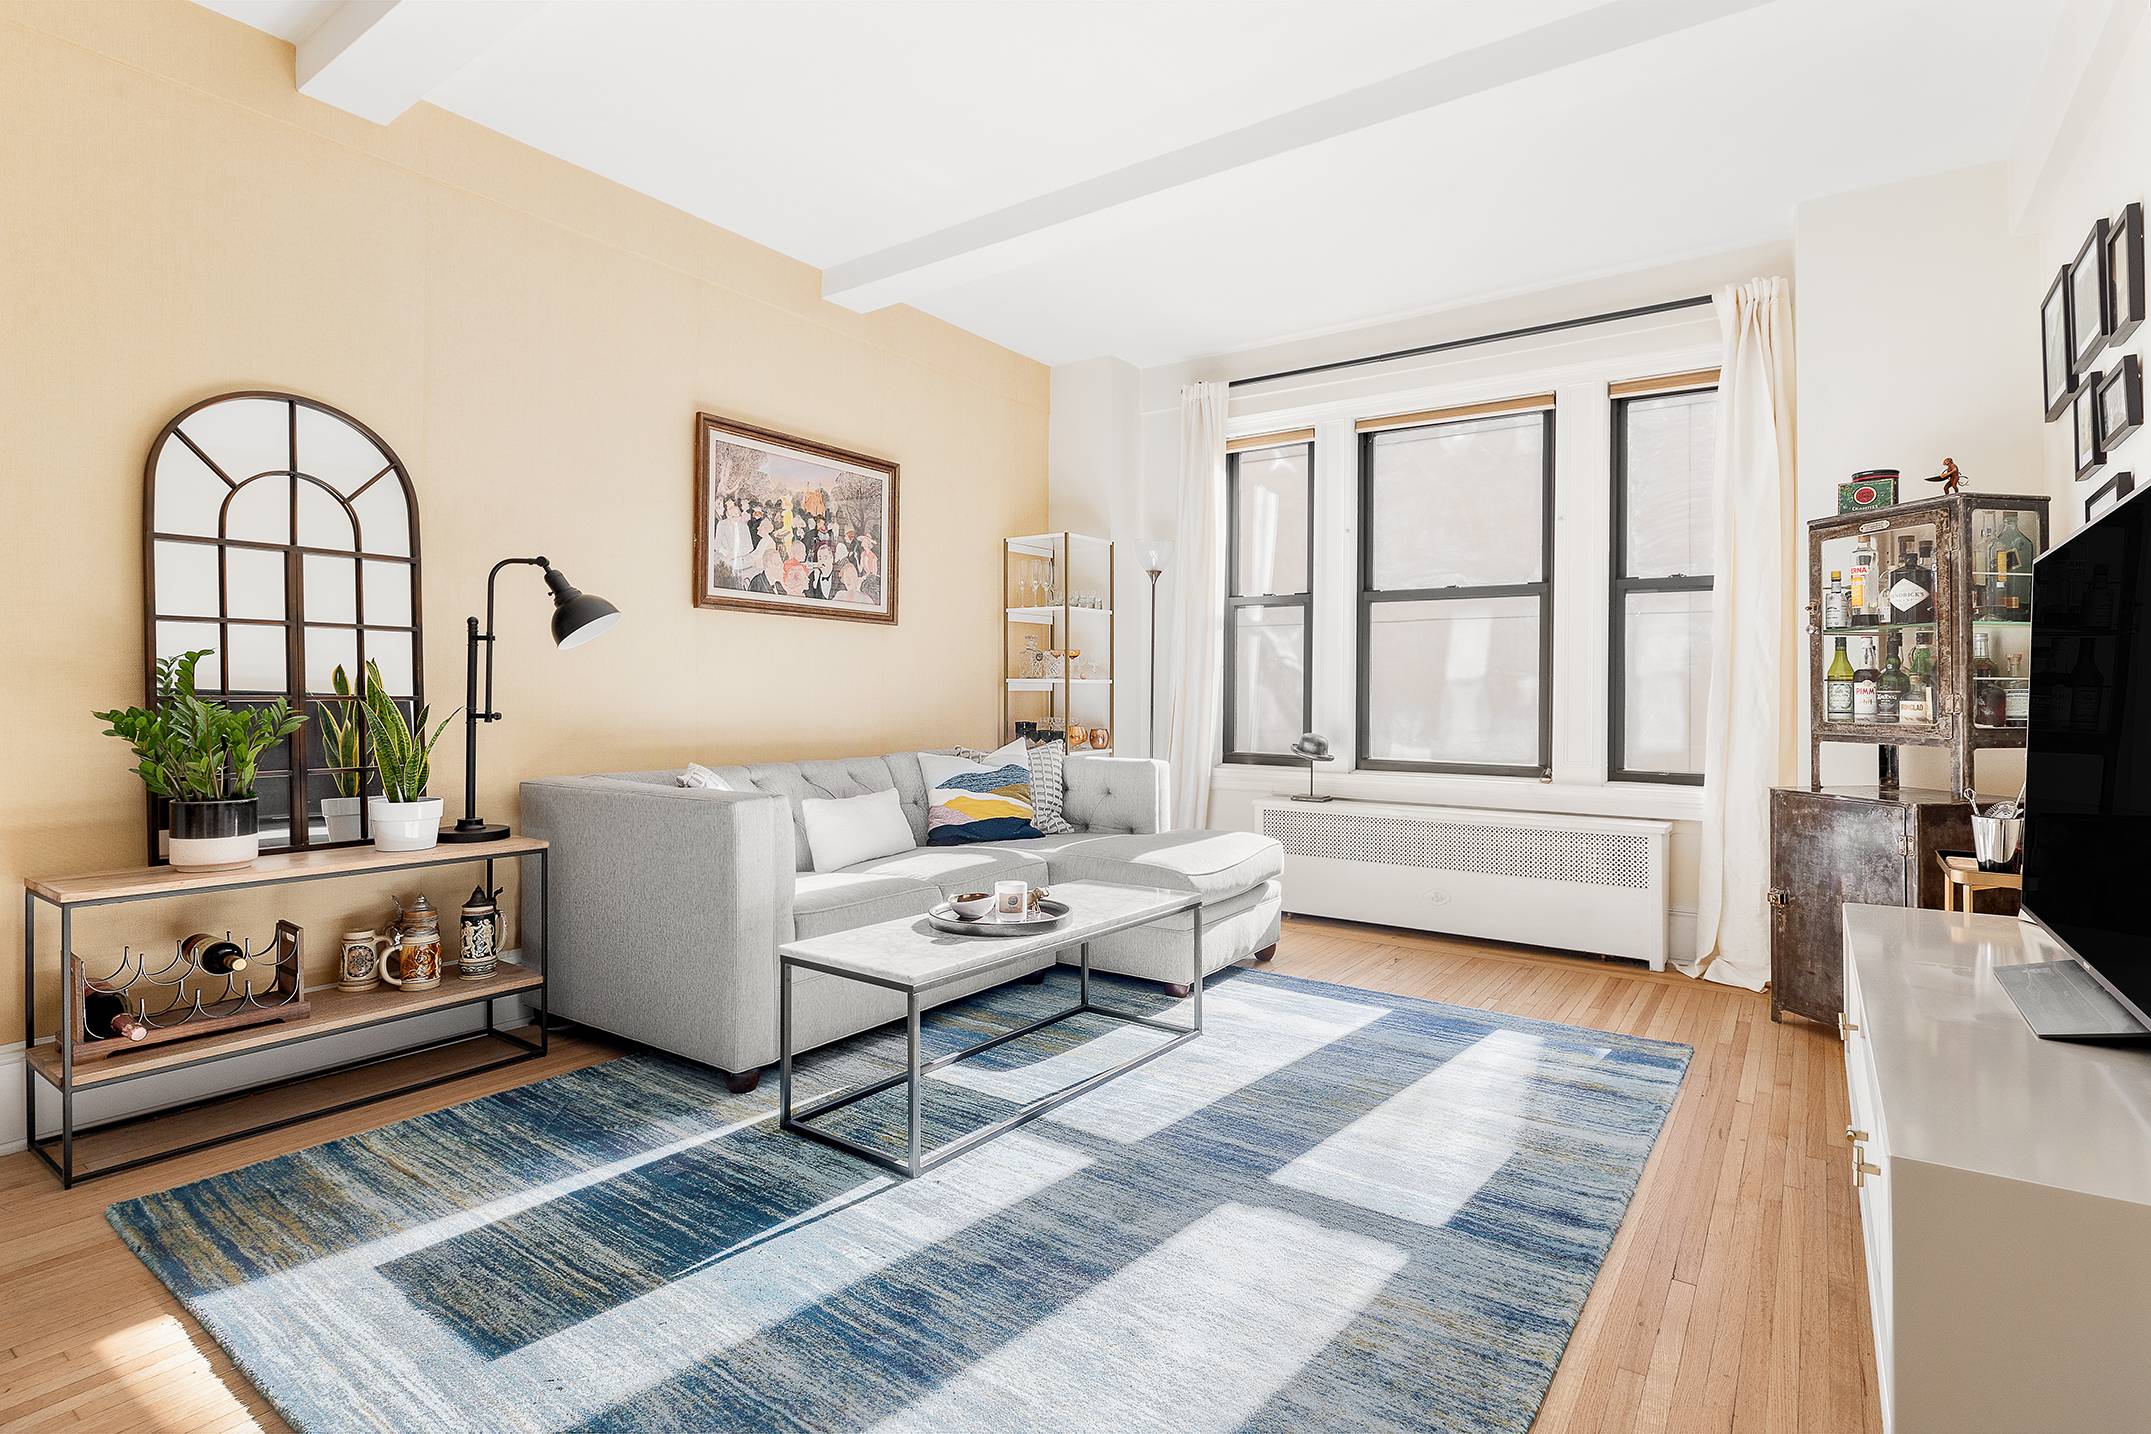 This spacious and sunny one bedroom is located in The Majestic, a full service building in the perfect Upper West Side location.